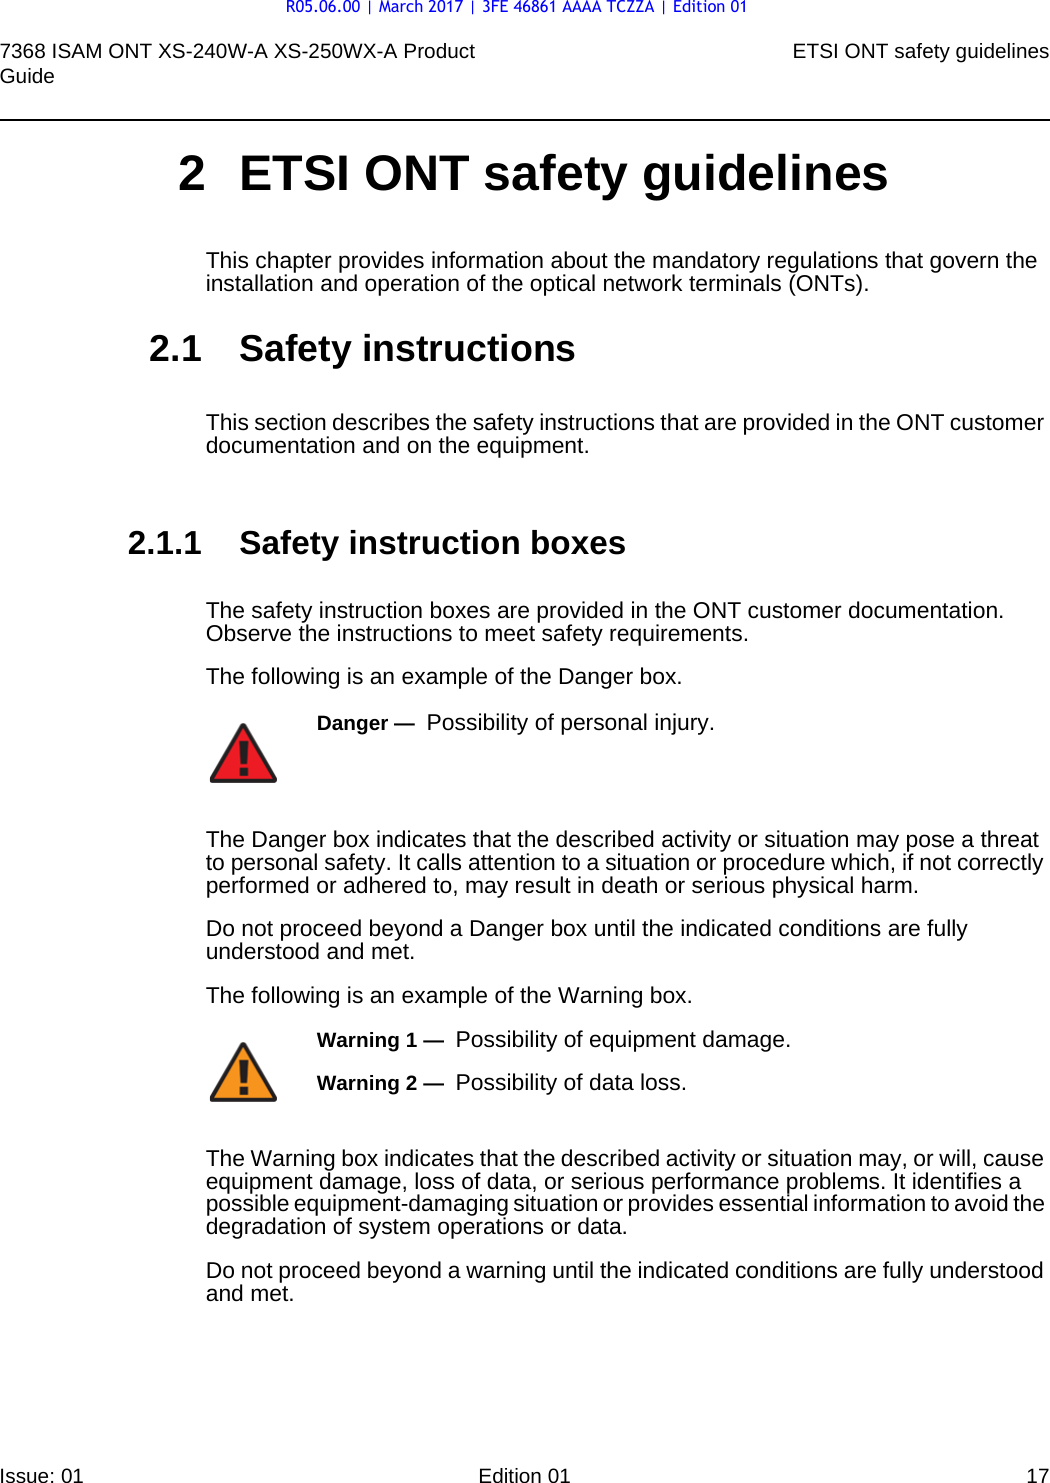 7368 ISAM ONT XS-240W-A XS-250WX-A Product Guide ETSI ONT safety guidelinesIssue: 01 Edition 01 17 2 ETSI ONT safety guidelinesThis chapter provides information about the mandatory regulations that govern the installation and operation of the optical network terminals (ONTs).2.1 Safety instructionsThis section describes the safety instructions that are provided in the ONT customer documentation and on the equipment.2.1.1 Safety instruction boxesThe safety instruction boxes are provided in the ONT customer documentation. Observe the instructions to meet safety requirements.The following is an example of the Danger box.The Danger box indicates that the described activity or situation may pose a threat to personal safety. It calls attention to a situation or procedure which, if not correctly performed or adhered to, may result in death or serious physical harm. Do not proceed beyond a Danger box until the indicated conditions are fully understood and met.The following is an example of the Warning box.The Warning box indicates that the described activity or situation may, or will, cause equipment damage, loss of data, or serious performance problems. It identifies a possible equipment-damaging situation or provides essential information to avoid the degradation of system operations or data.Do not proceed beyond a warning until the indicated conditions are fully understood and met.Danger —  Possibility of personal injury. Warning 1 —  Possibility of equipment damage.Warning 2 —  Possibility of data loss.R05.06.00 | March 2017 | 3FE 46861 AAAA TCZZA | Edition 01